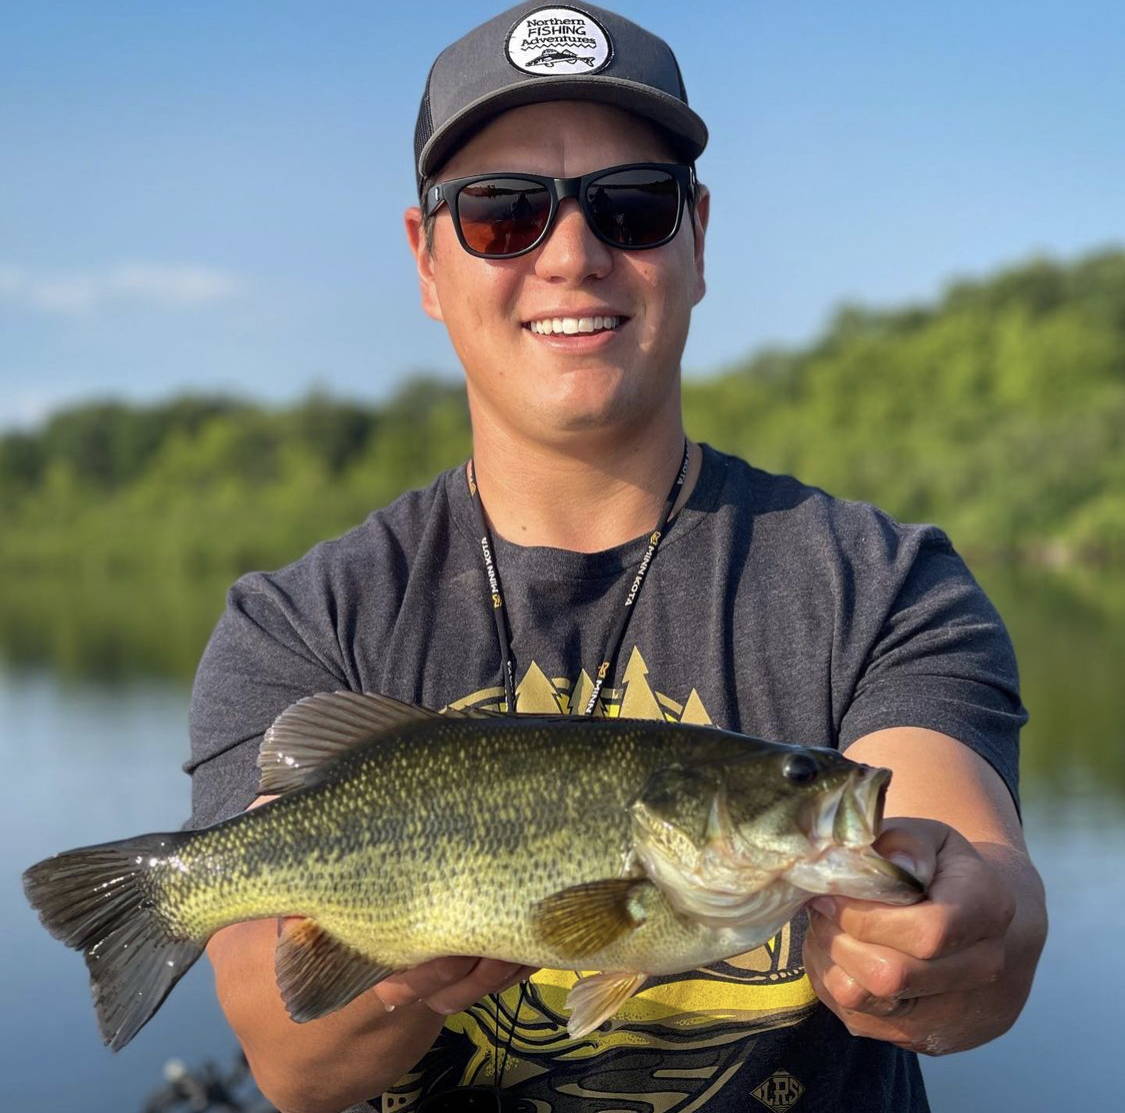 BEST POLARIZED SUNGLASSES FOR FISHING – BUYER'S GUIDE